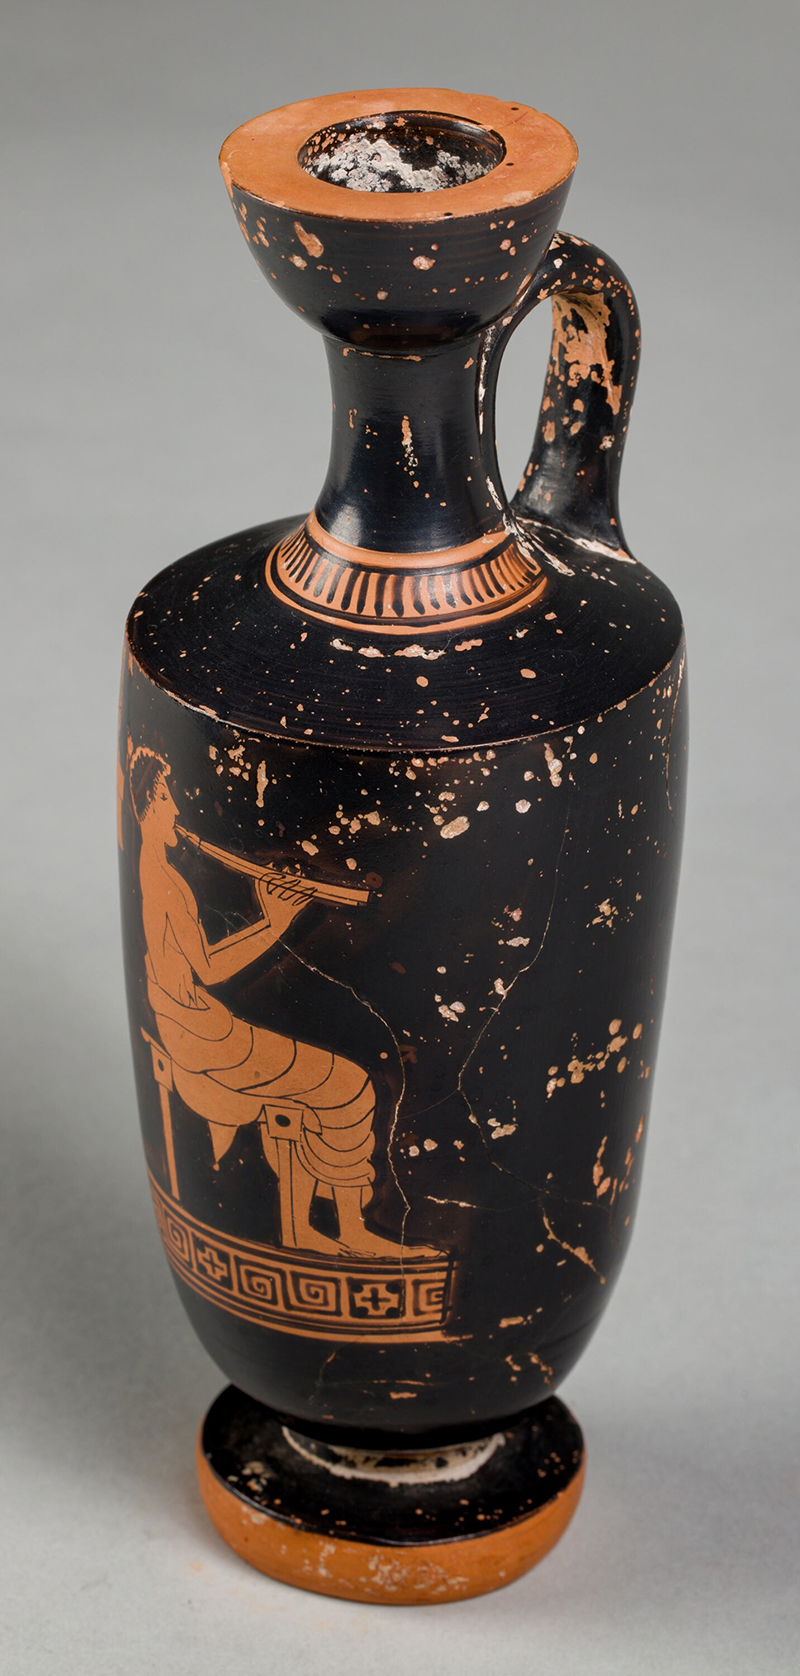 An ancient red figure vessel with a painting of a figure playing the flute